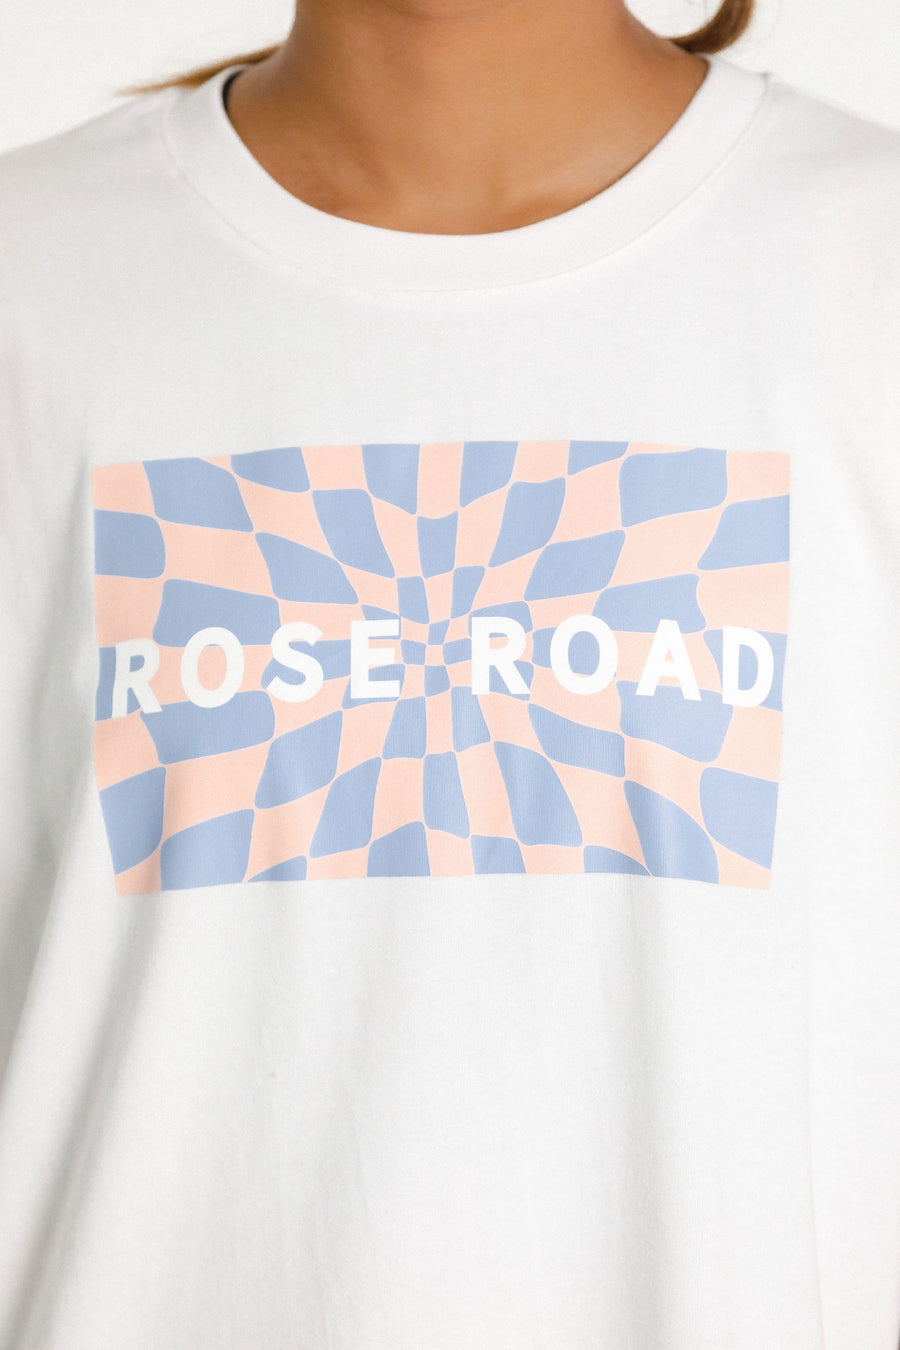 ROSE ROAD TOPHER TEE - WHITE TROPICAL CHECK - WILD ROSE